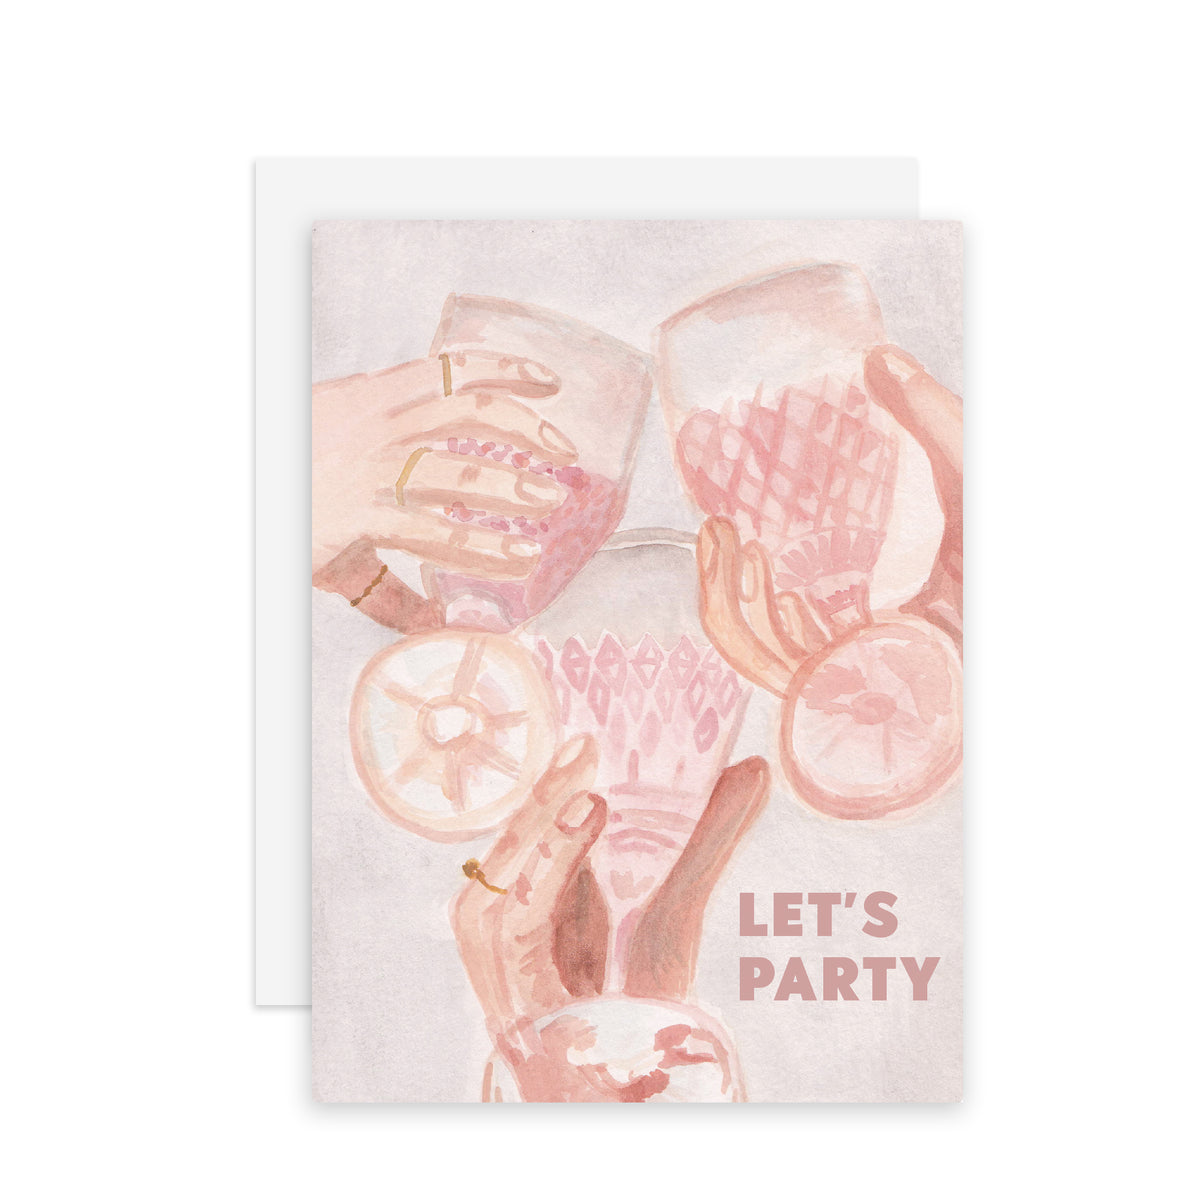 Let's Party - A2 notecard